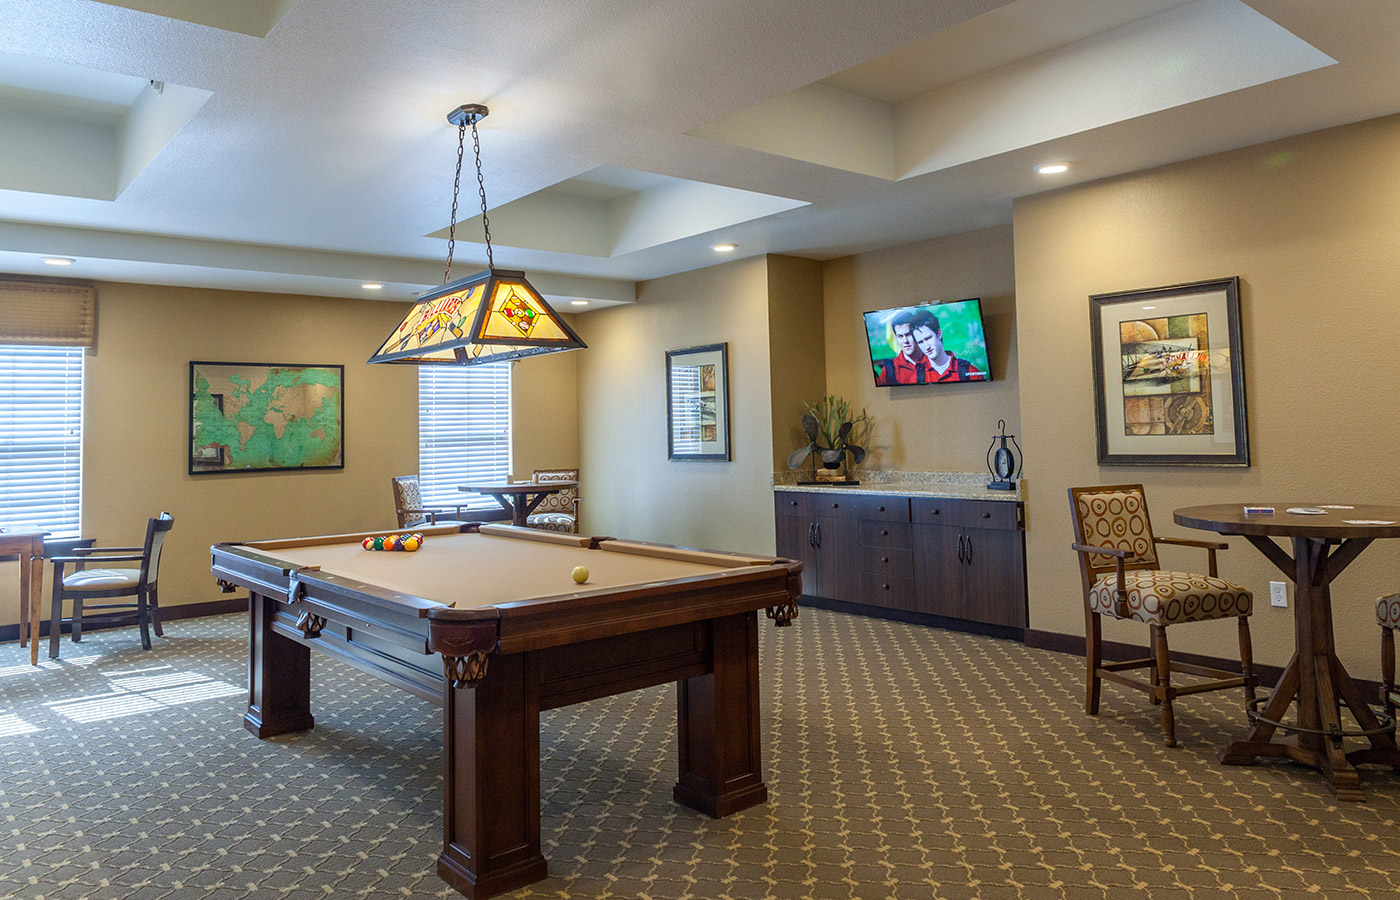 A table and various other amenities in the Billiard Room.